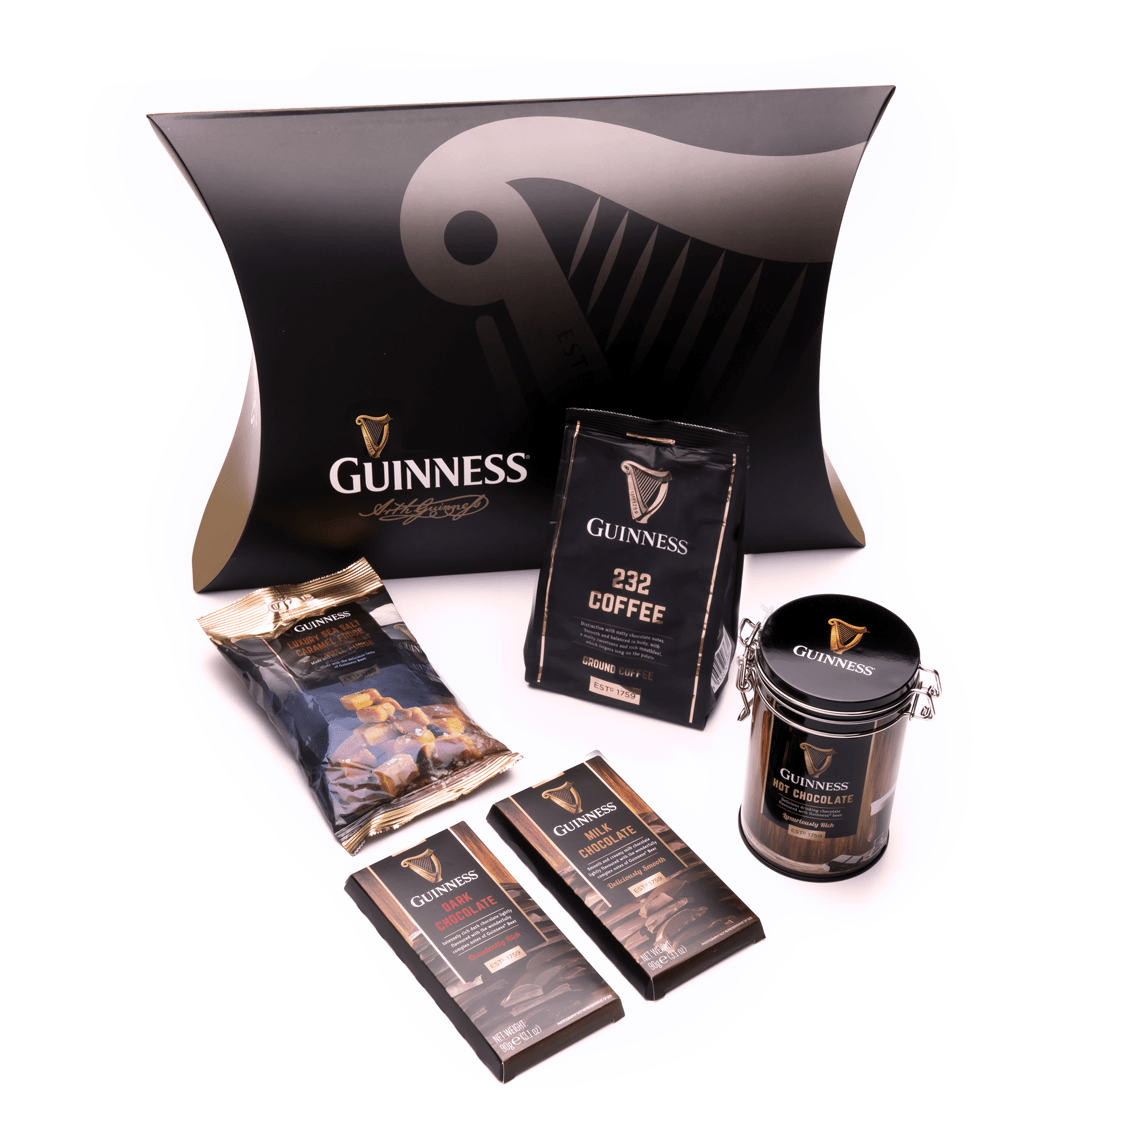 Perfect for the Guinness aficionado in your life, this impressive Guinness Indulgence Gift Box includes a delicious assortment of chocolates and a beautifully designed harp.